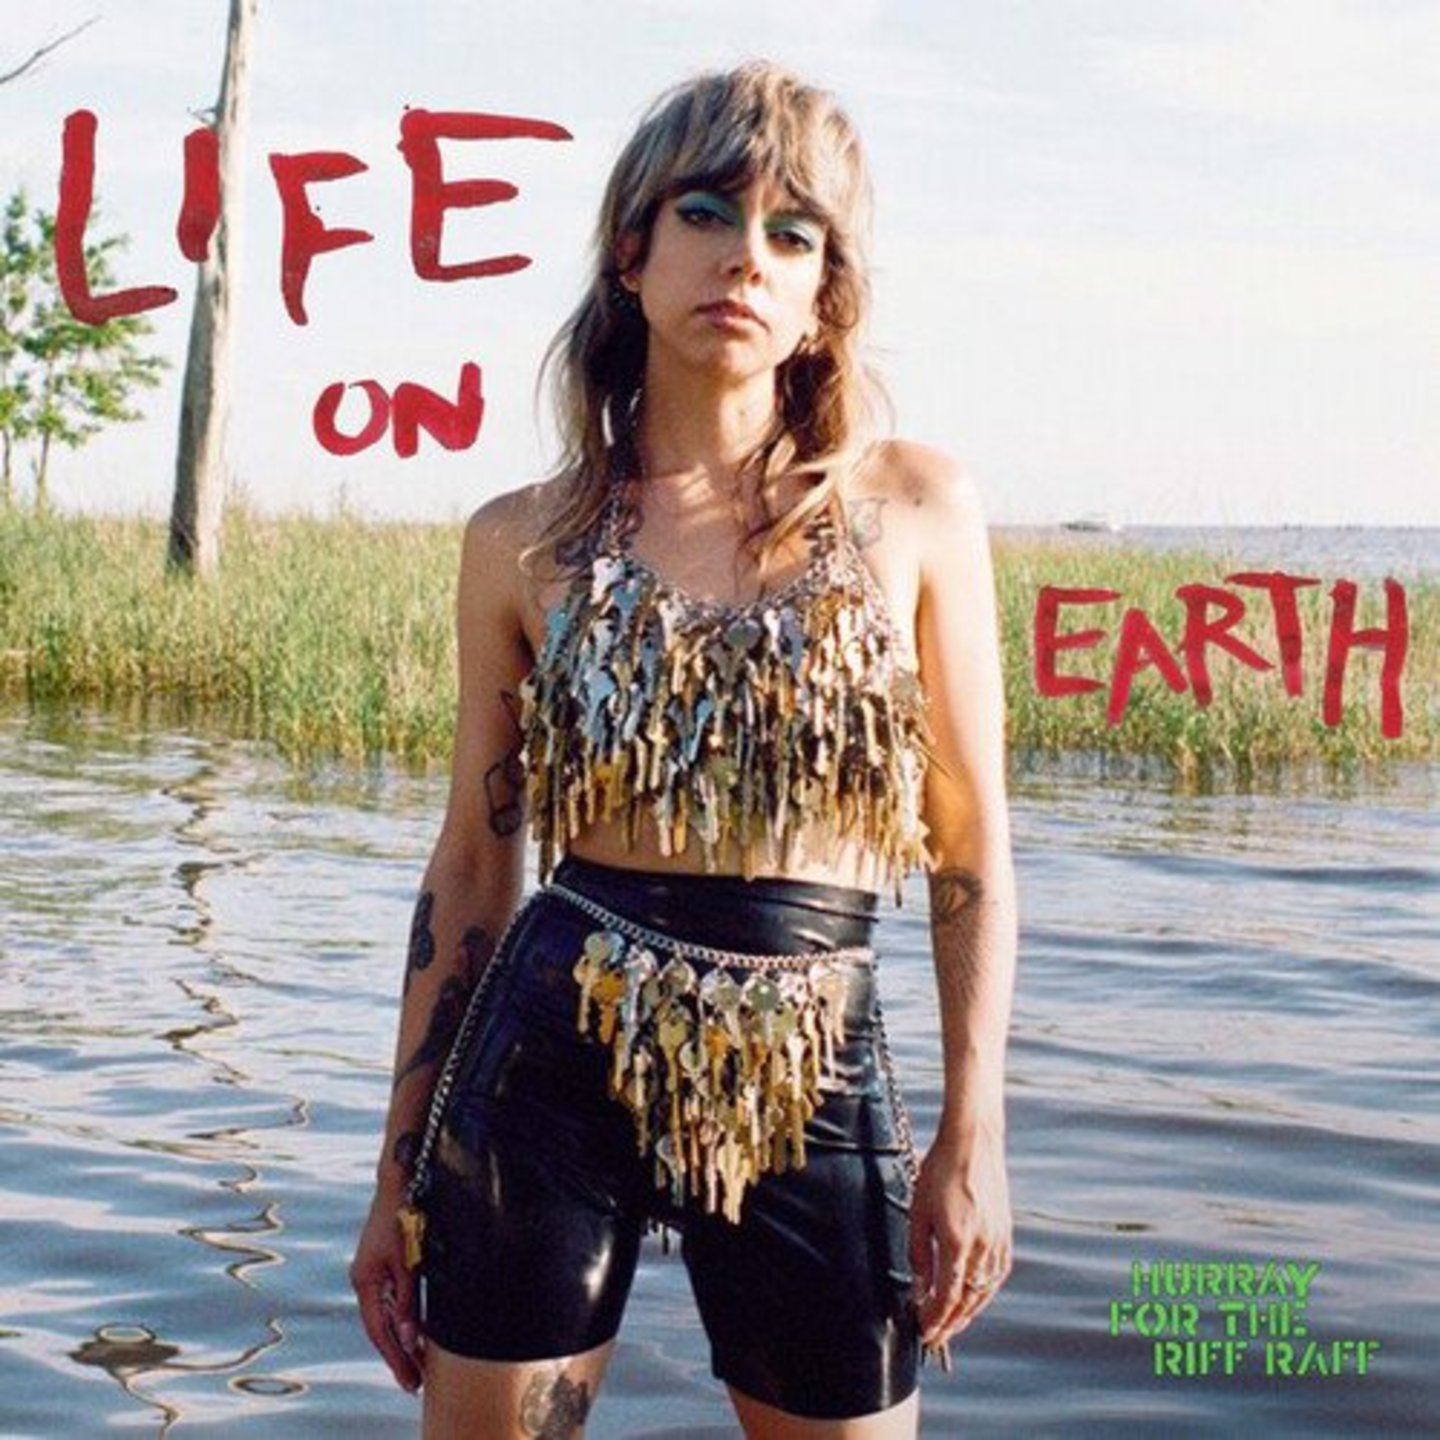 HURRAY FOR THE RIFF RAFF - Life On Earth LP